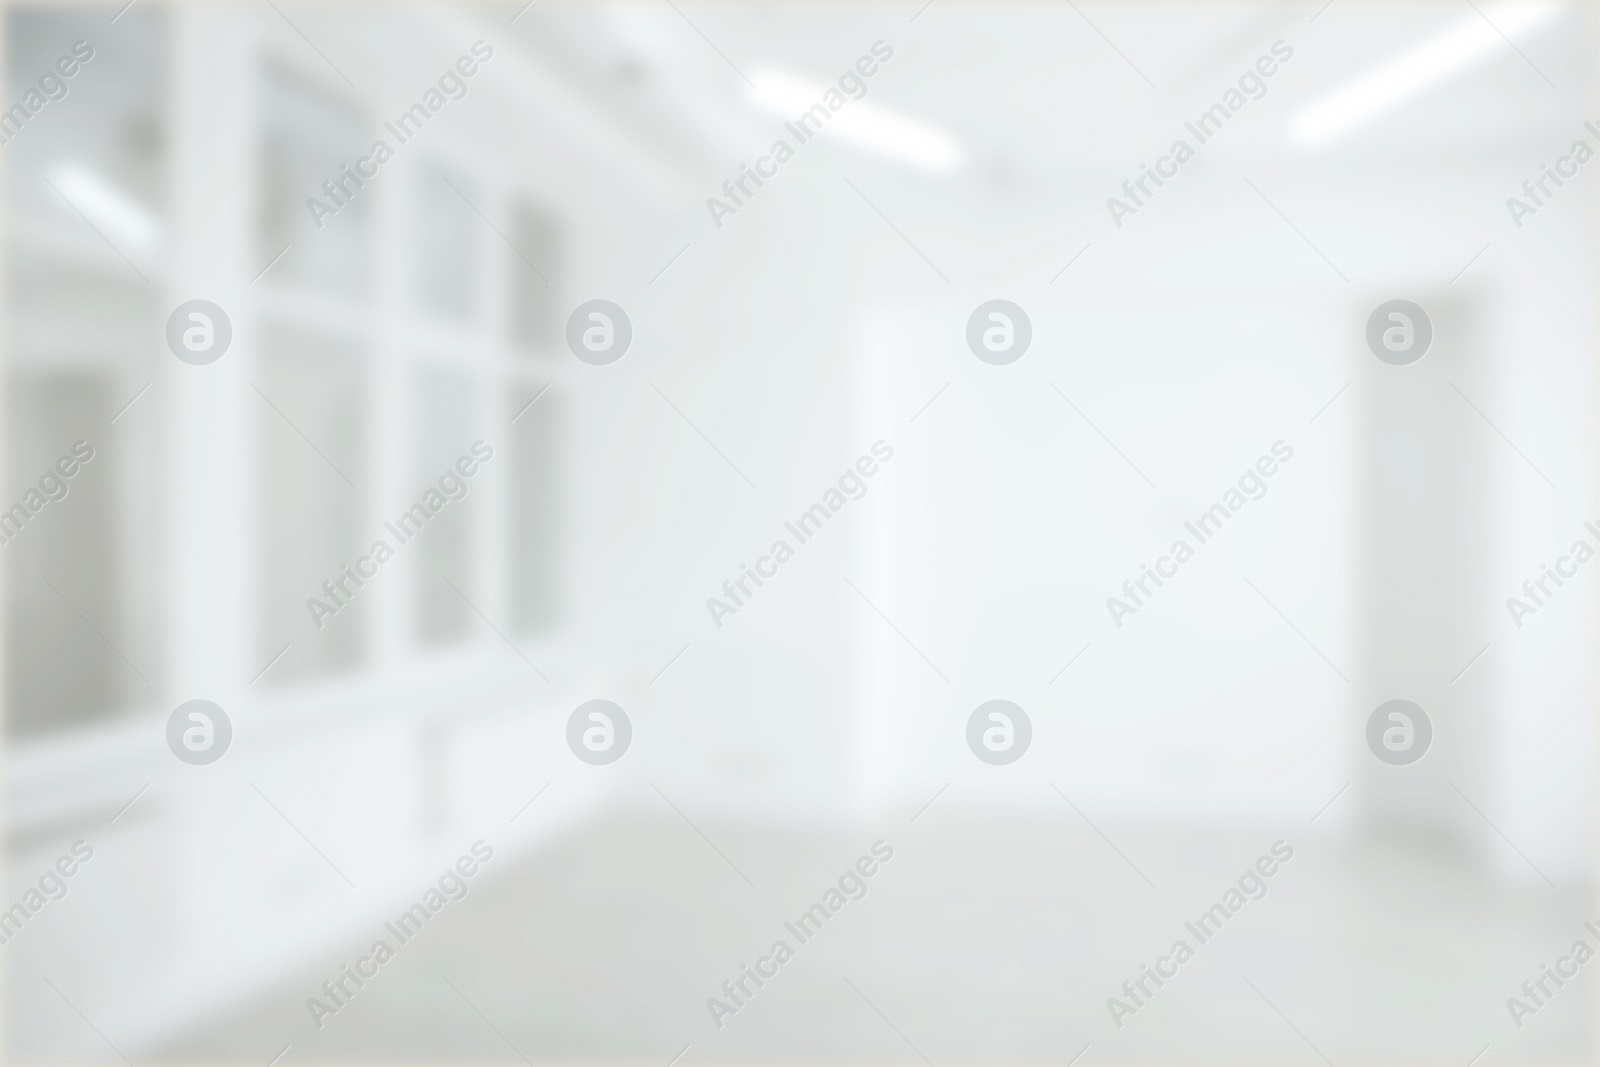 Image of Empty room with white walls and large window, blurred view